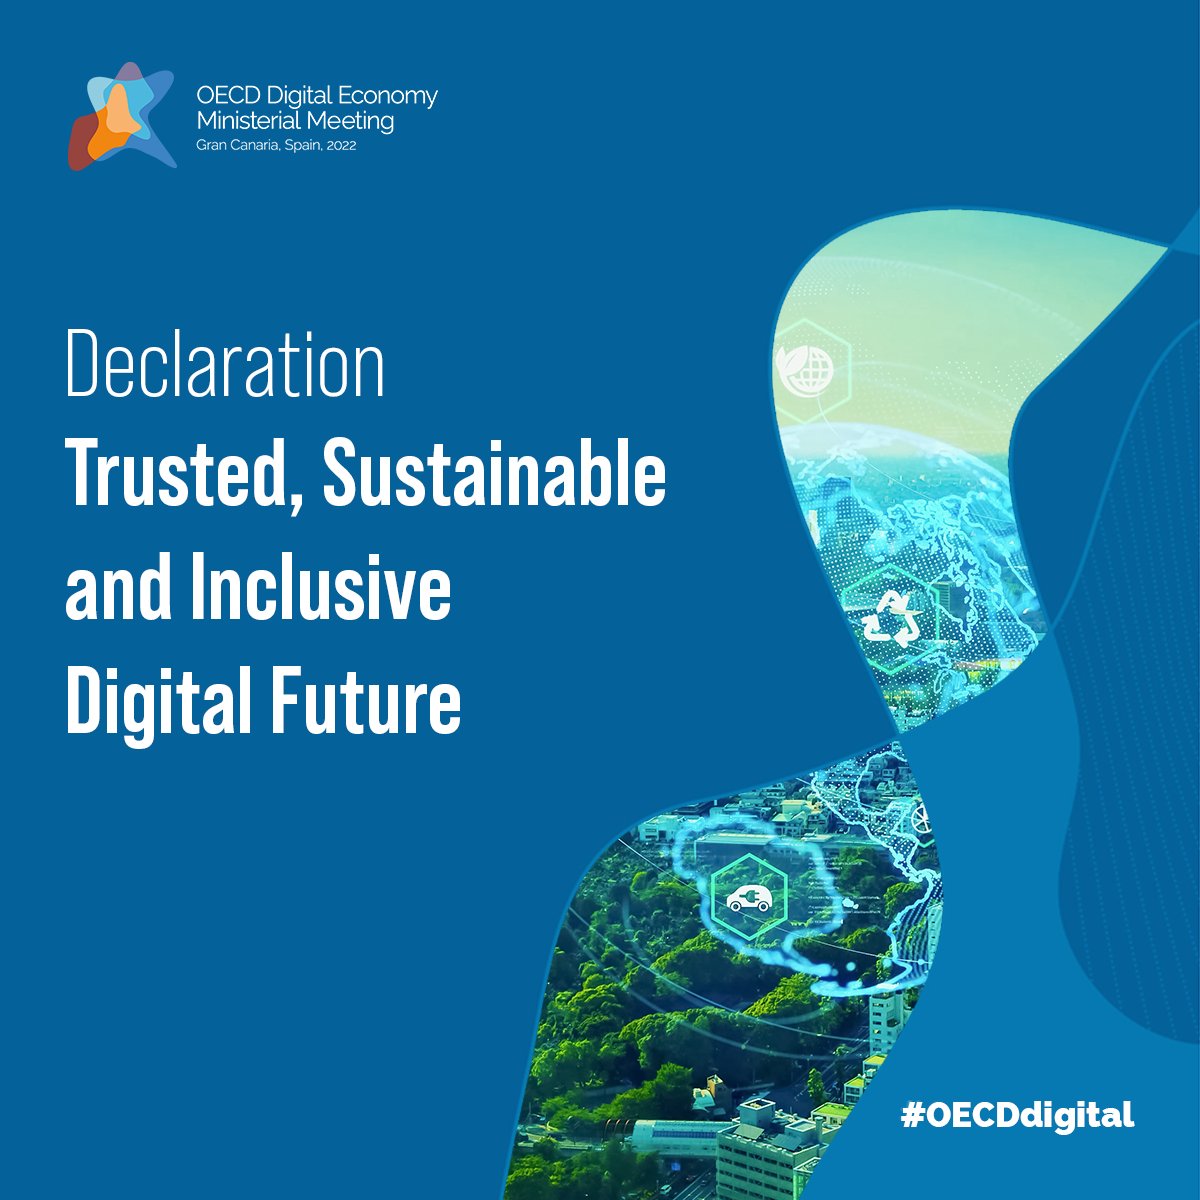 The @OECD Declaration on a Trusted, Sustainable and Inclusive Digital Future is a vision for a human-centric, rights-oriented #DigitalTransformation for
💸 A thriving economy
👥 Better societies
🤖 Beneficial AI & emerging tech
For all 🙋‍♀️

➡️ bit.ly/3h2zaZA

#OECDdigital